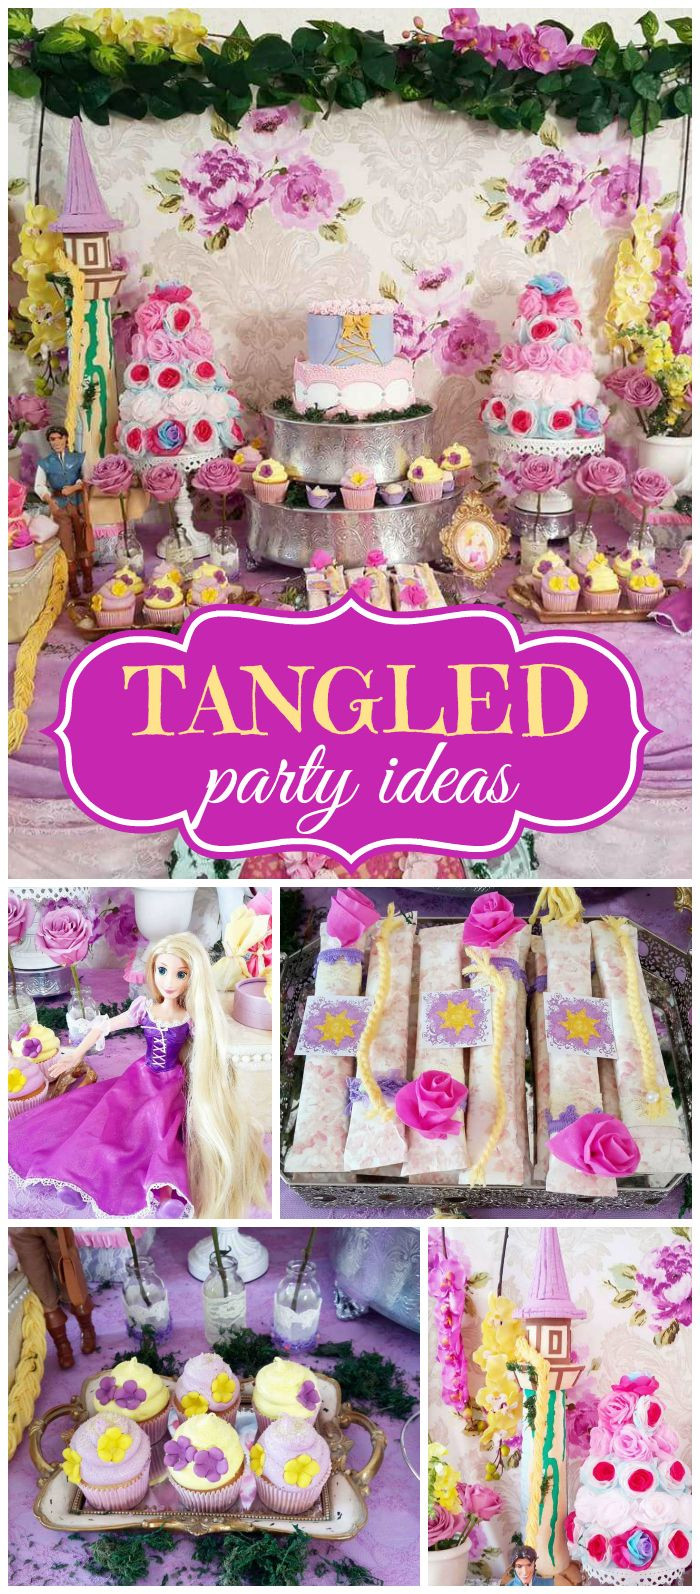 Rapunzel Birthday Party Supplies
 162 best images about Rapunzel Tangled Party Ideas on